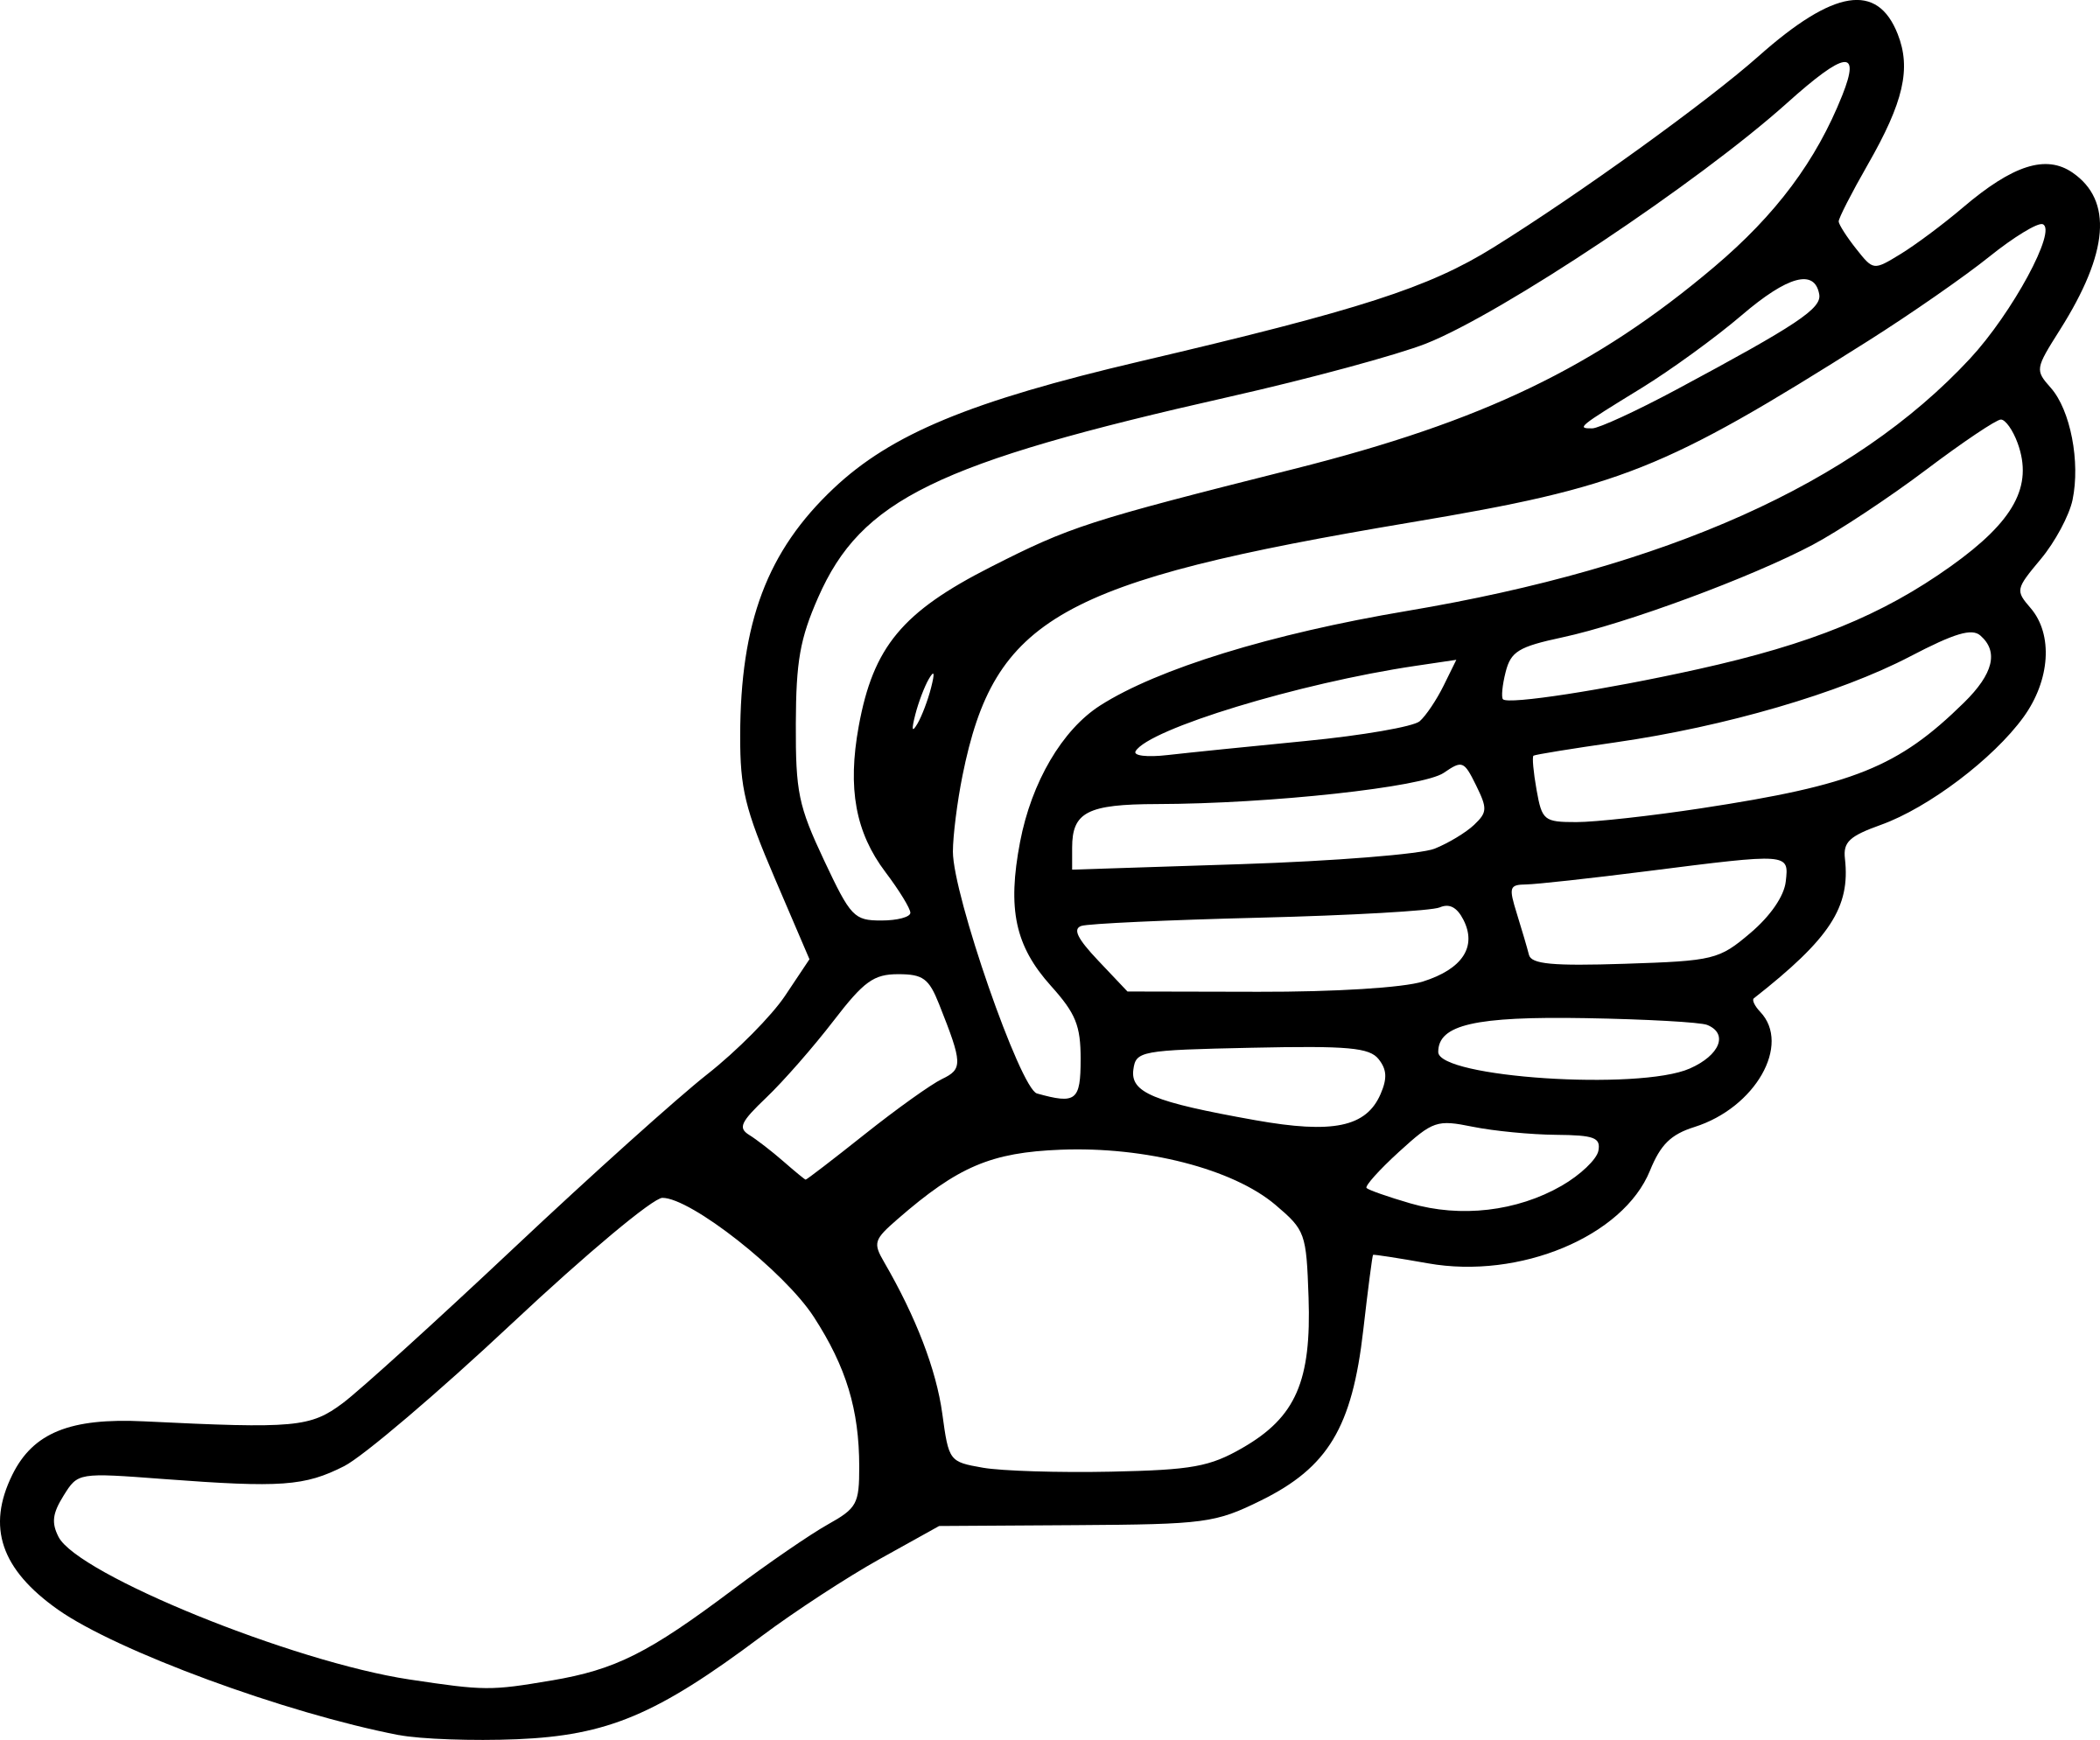 Flying Foot Logo - Winged Foot Logo Group with items